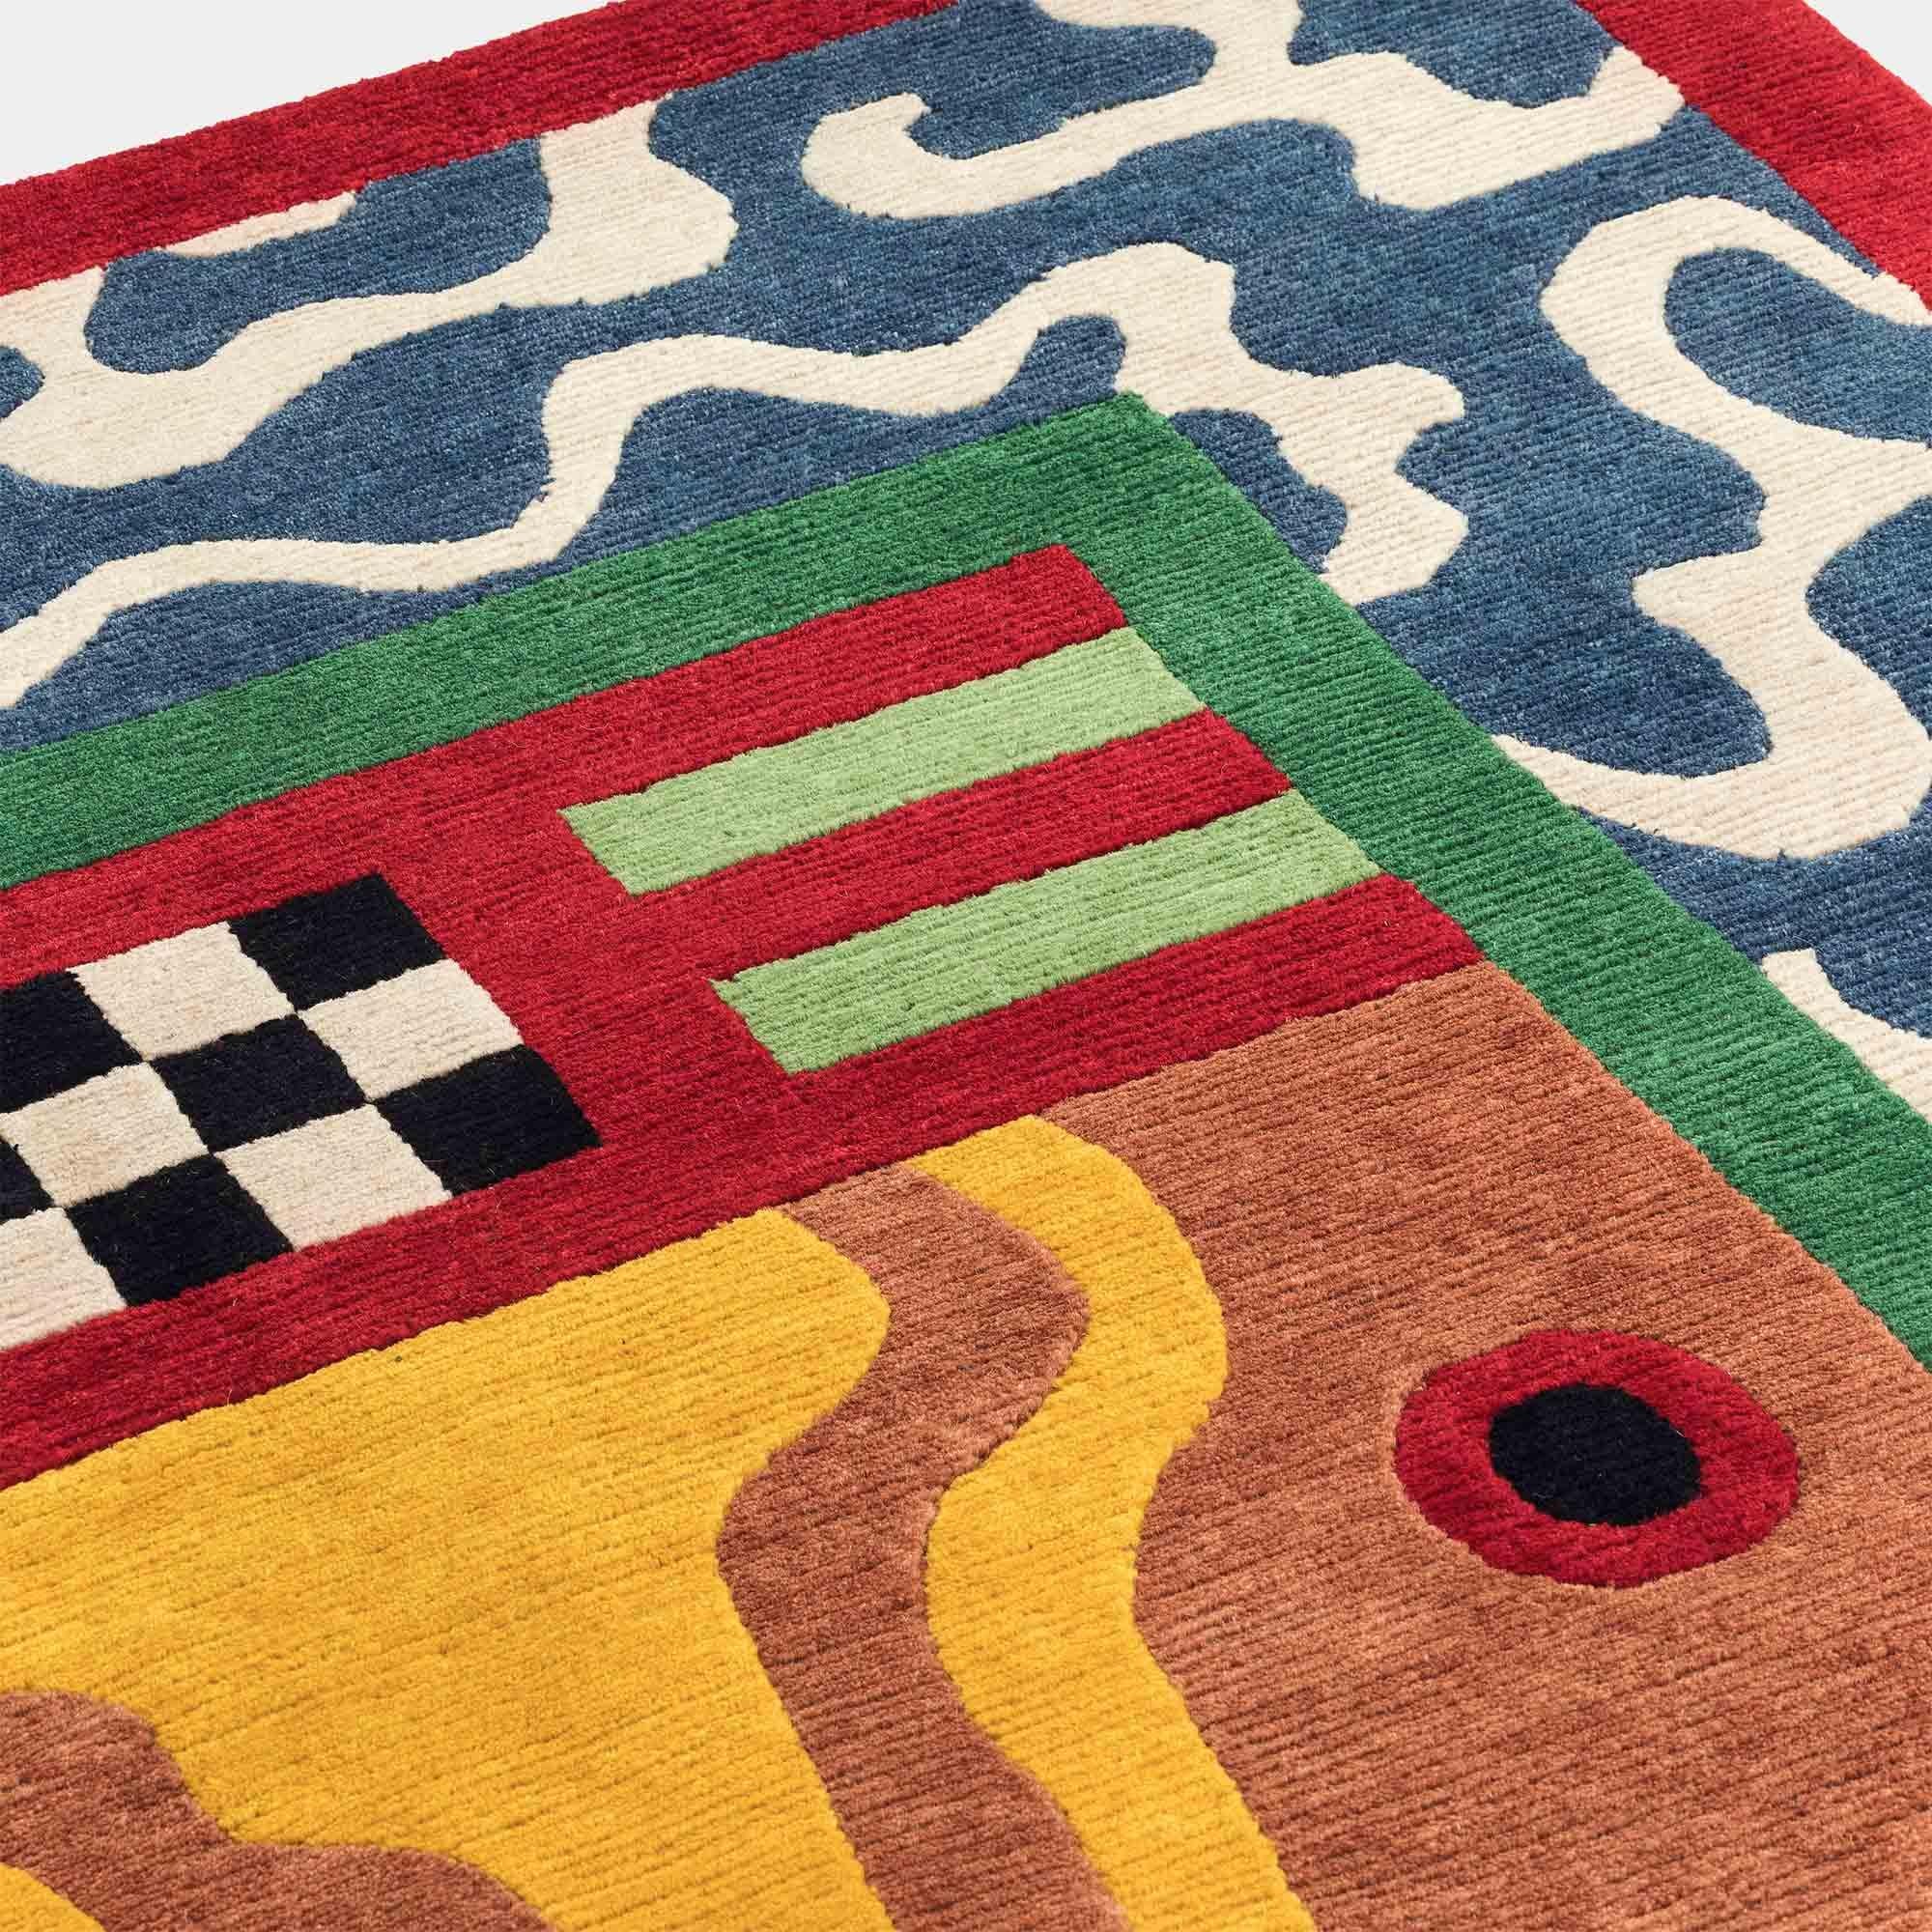 SMALL BIRDS woollen carpet by Nathalie du Pasquier for Post Design collection/Memphis

A woollen carpet handcrafted by different Nepalese artisans. Made in a limited edition of 36 signed, numbered examples.

As the carpet is made by hand, there